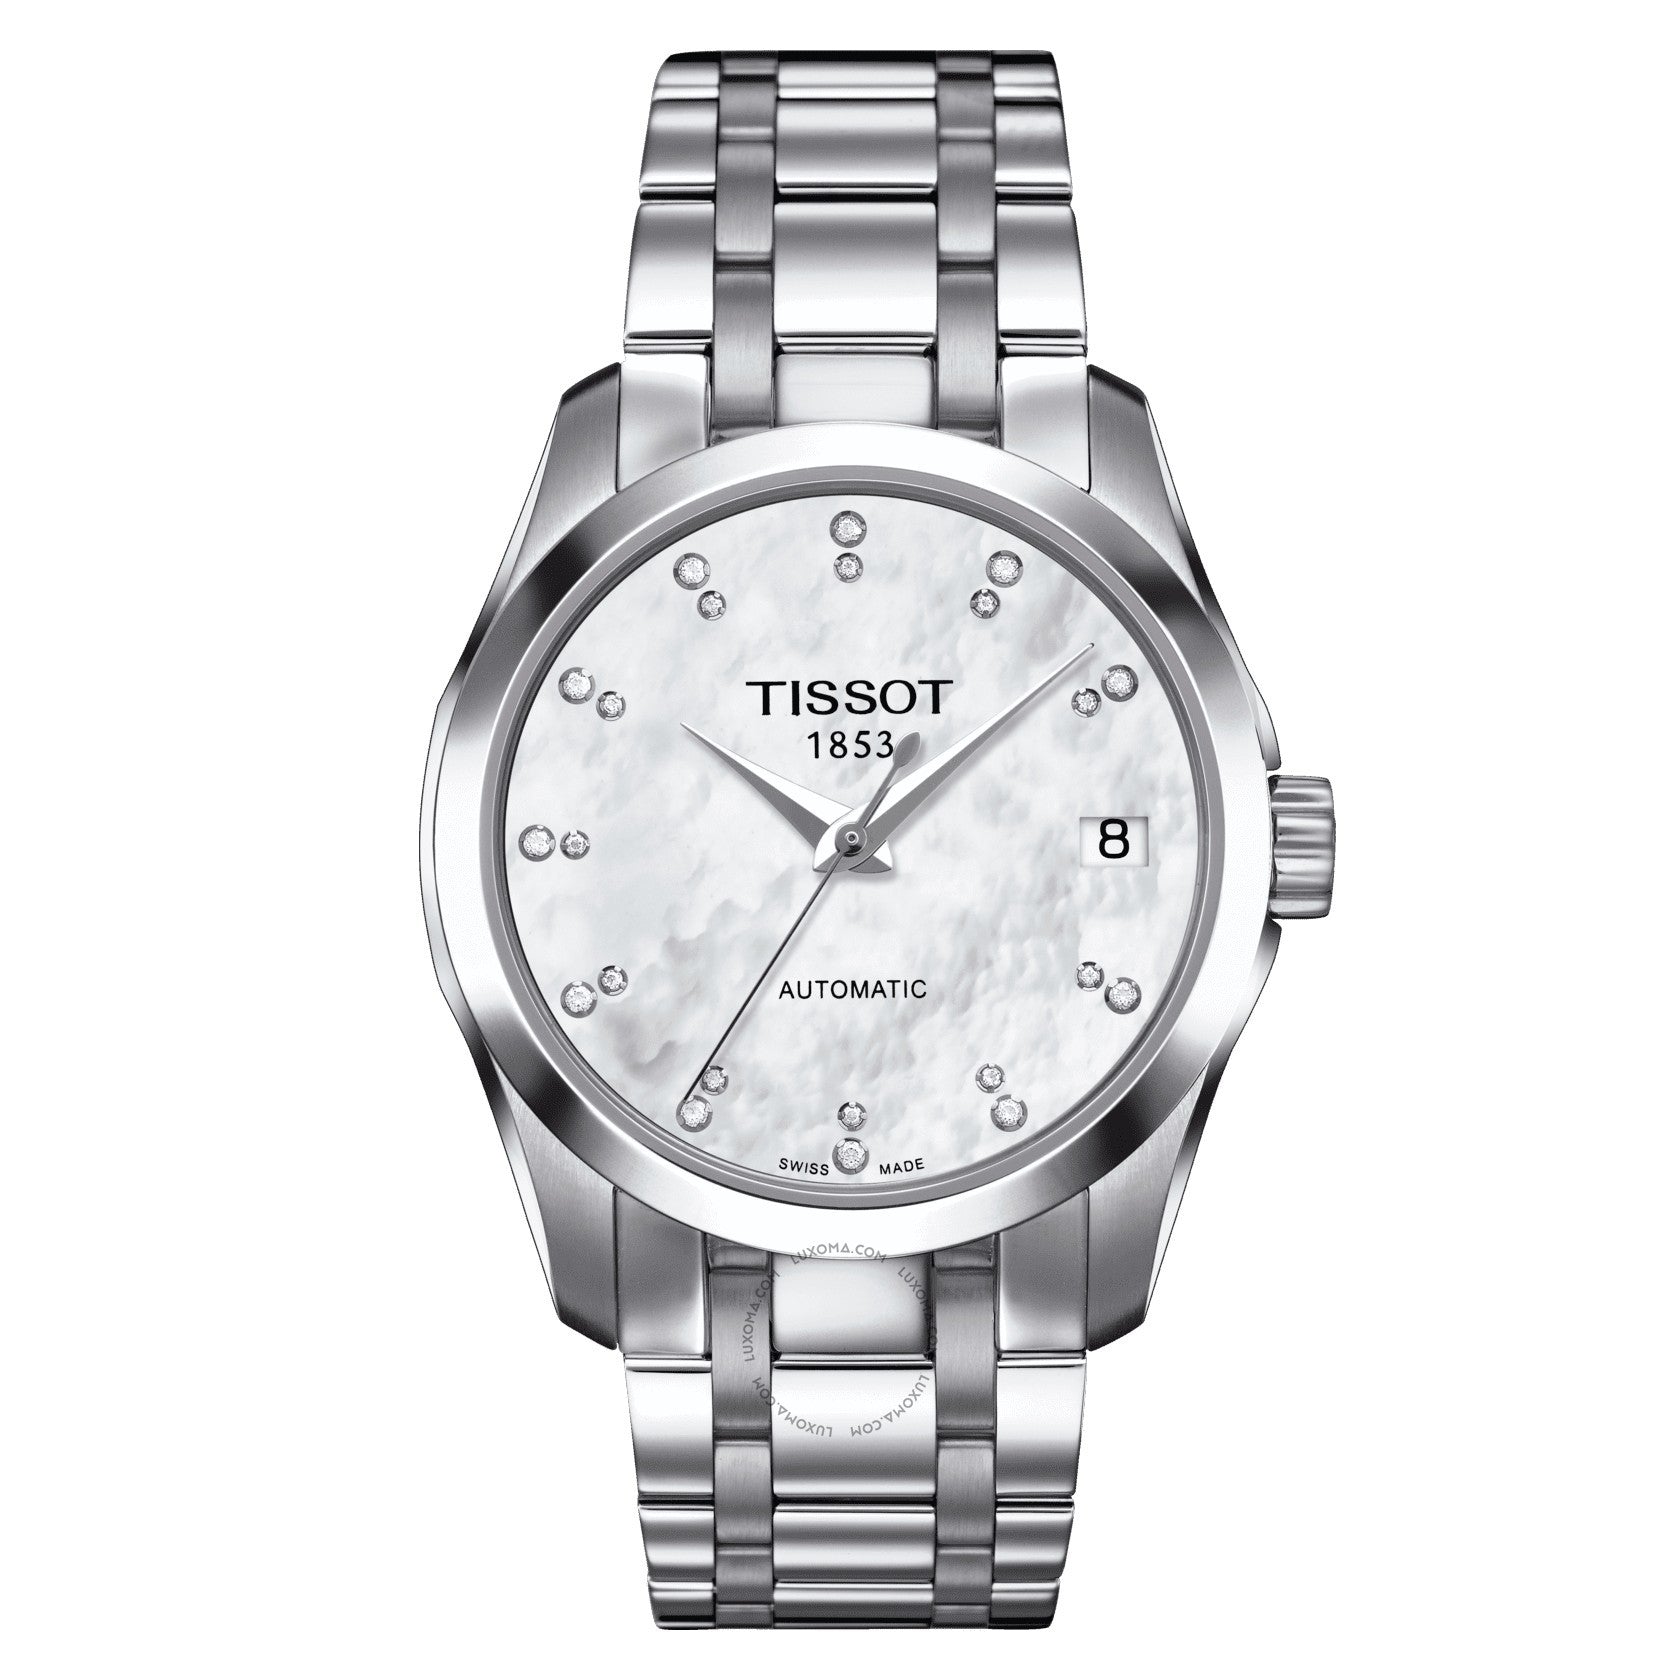 Tissot Couturier Automatic Mother of Pearl Dial Ladies Watch T035.207.11.116.00